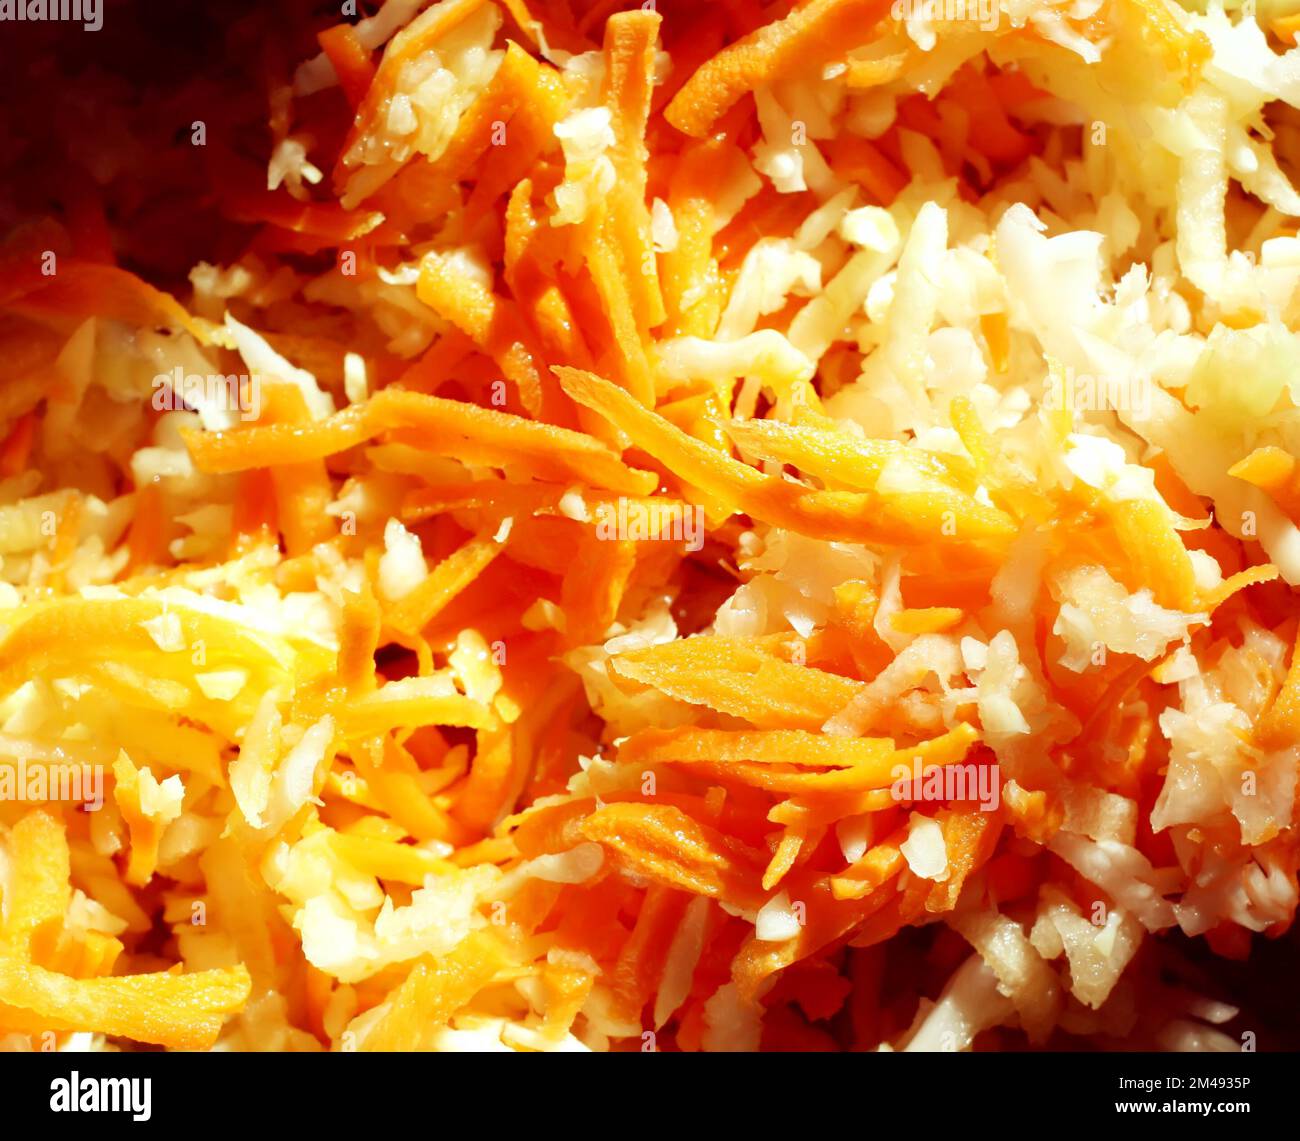 Fresh vegetable sald. Healthy food. Cabbage and carrots Stock Photo